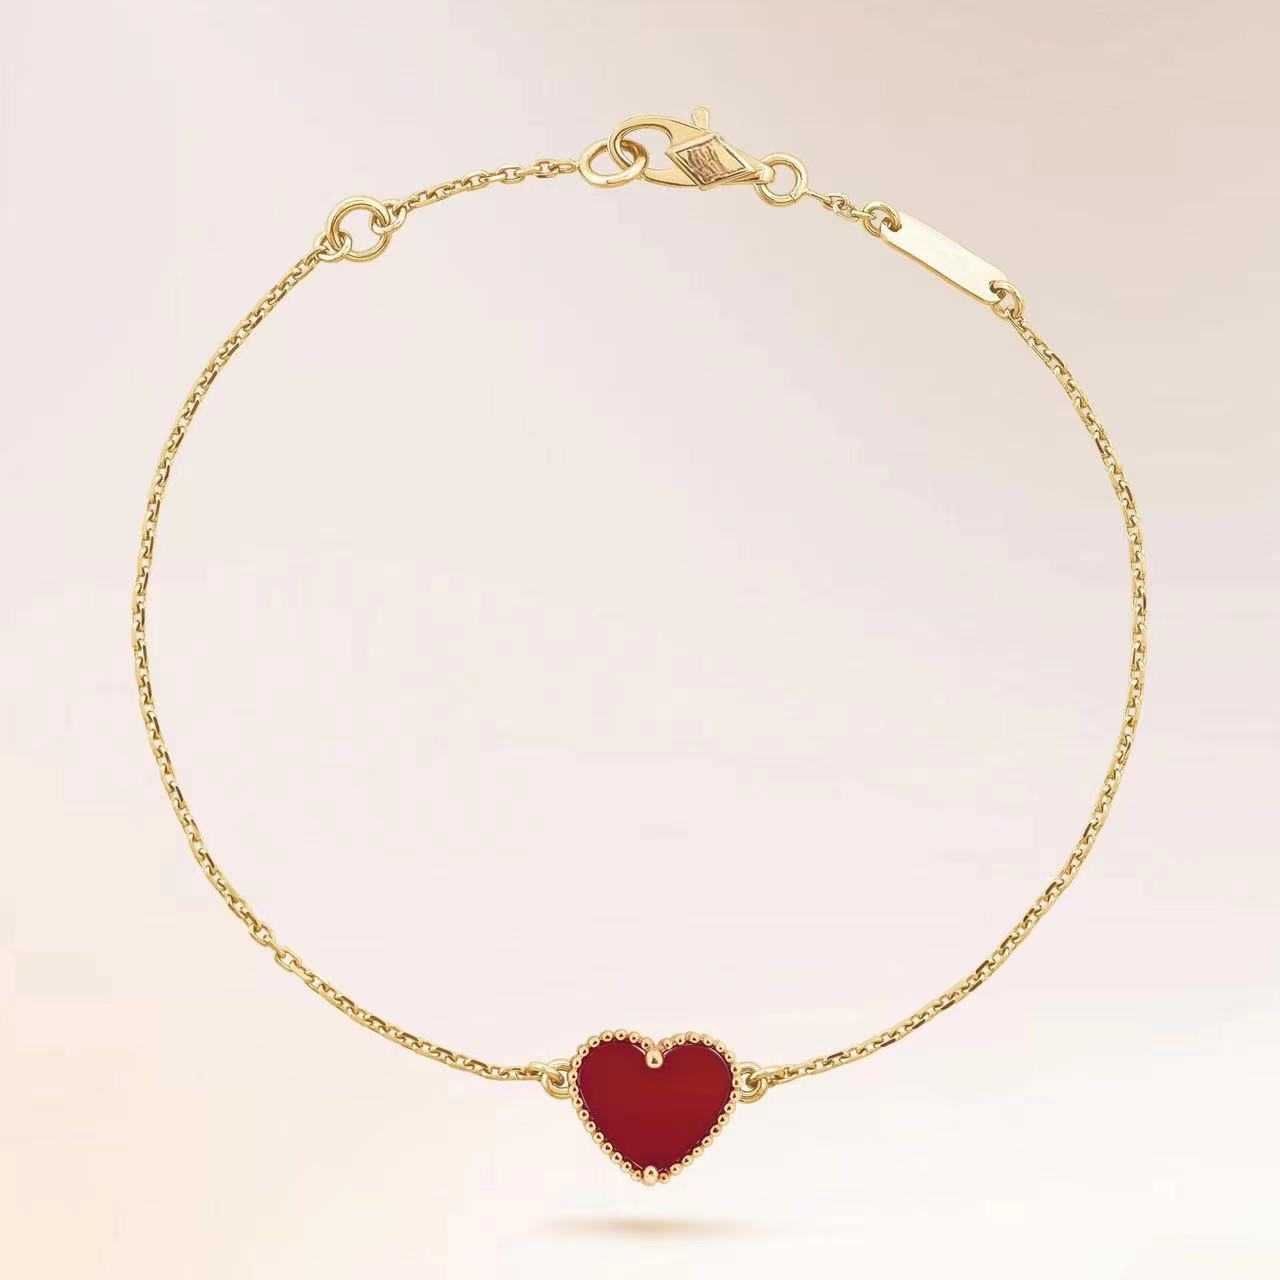 1 collier